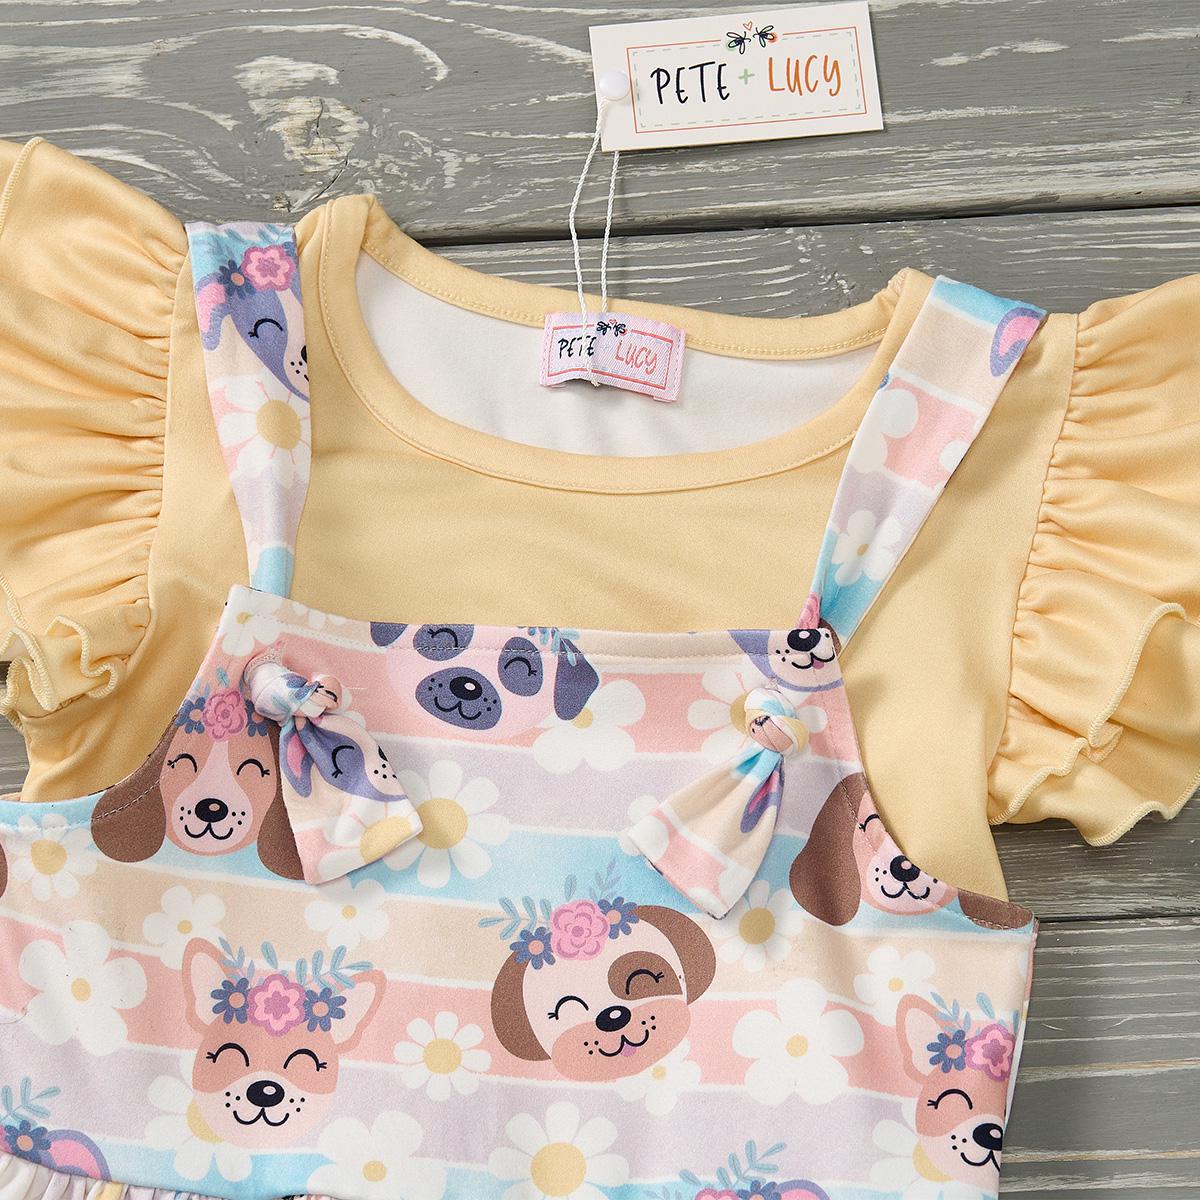 (Preorder) Puppy Blossoms Jumper Set by Pete + Lucy